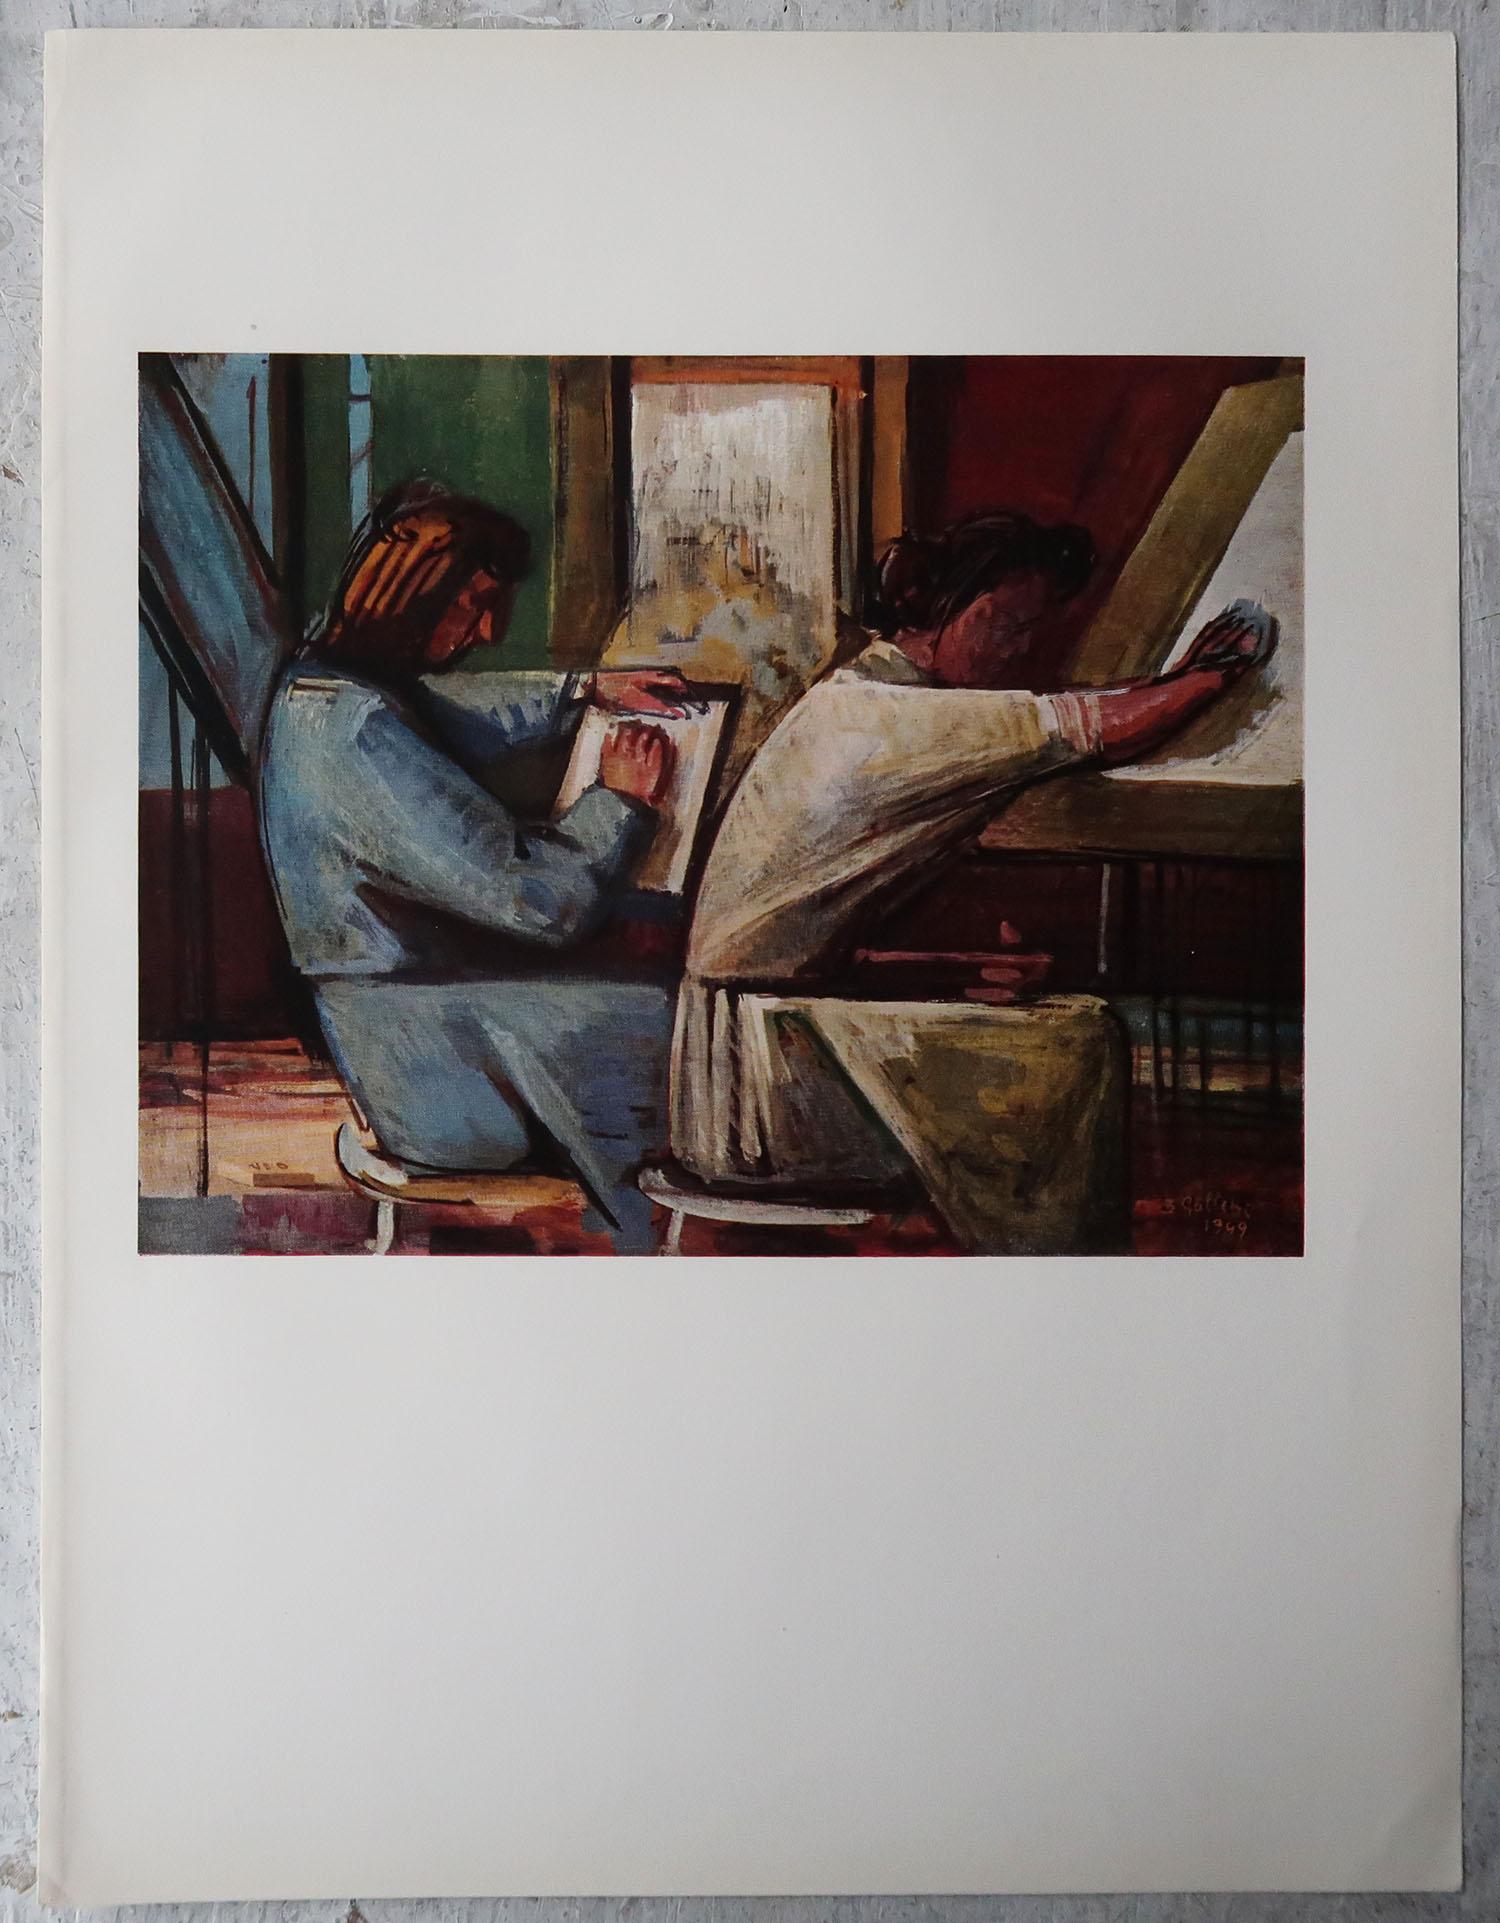 Industrial Original Vintage Print After Bepi Galetti, Itlay, Verzocchi, 1950 For Sale